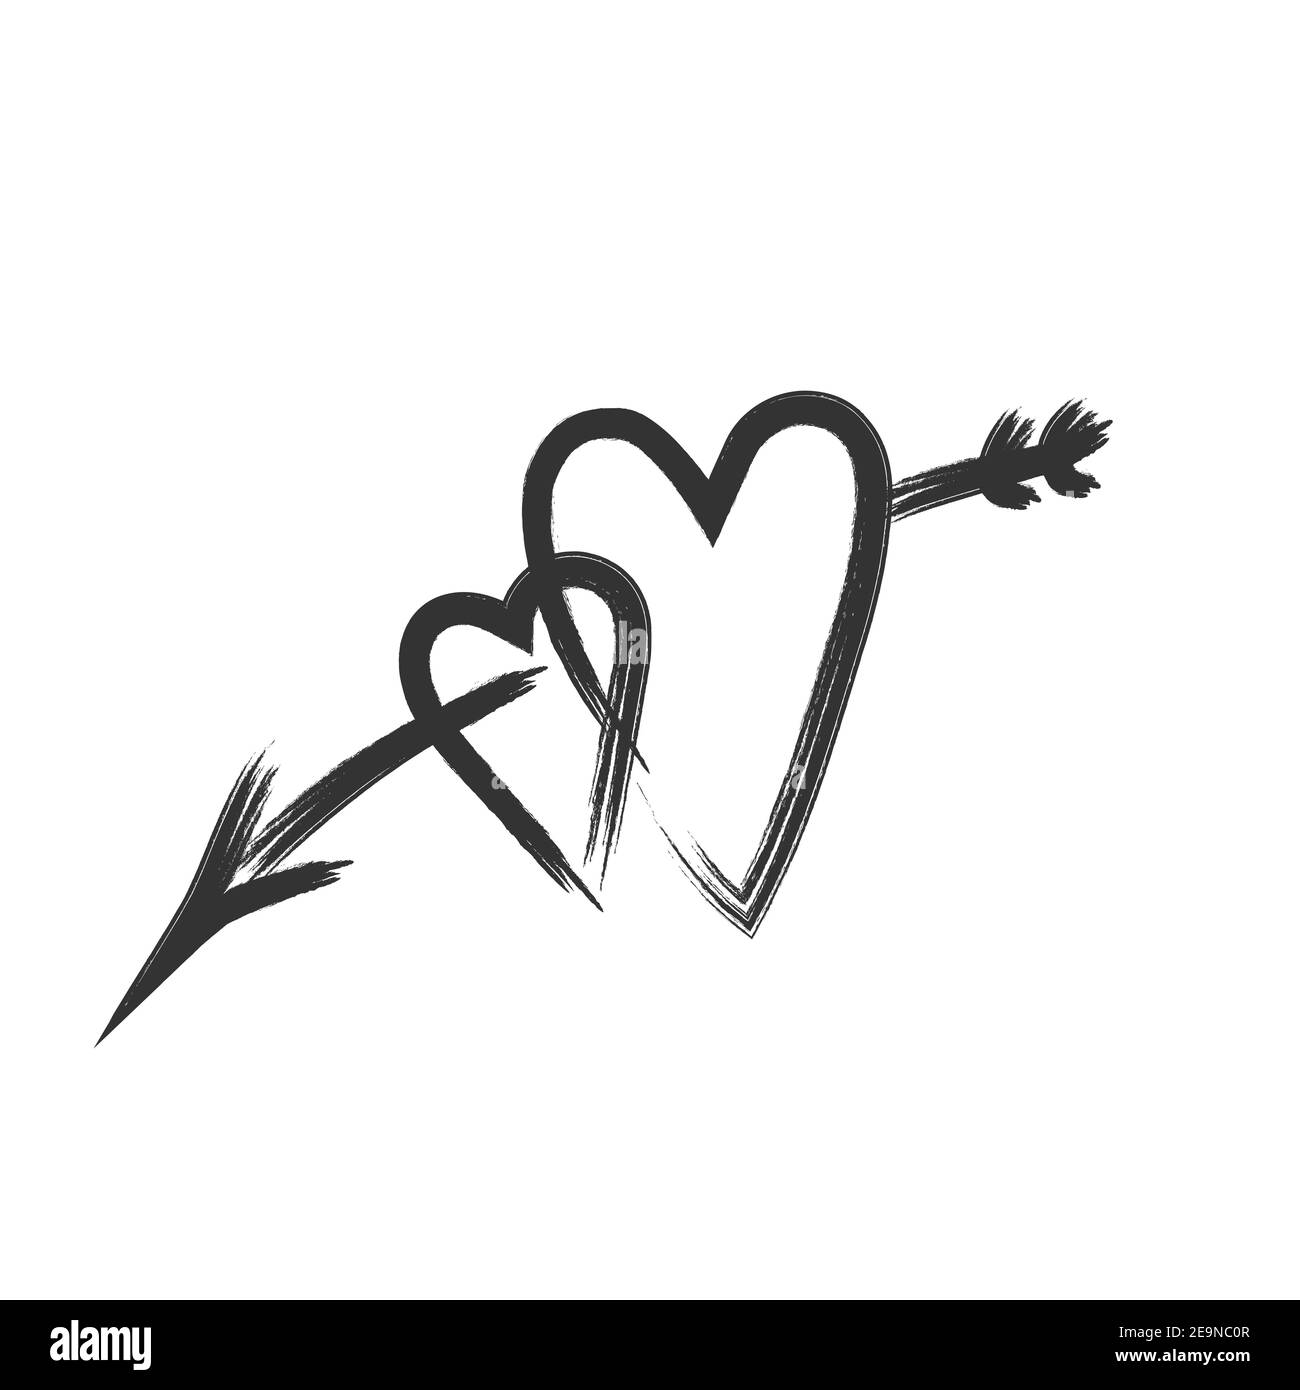 Love heart arrow Black and White Stock Photos & Images - Alamy